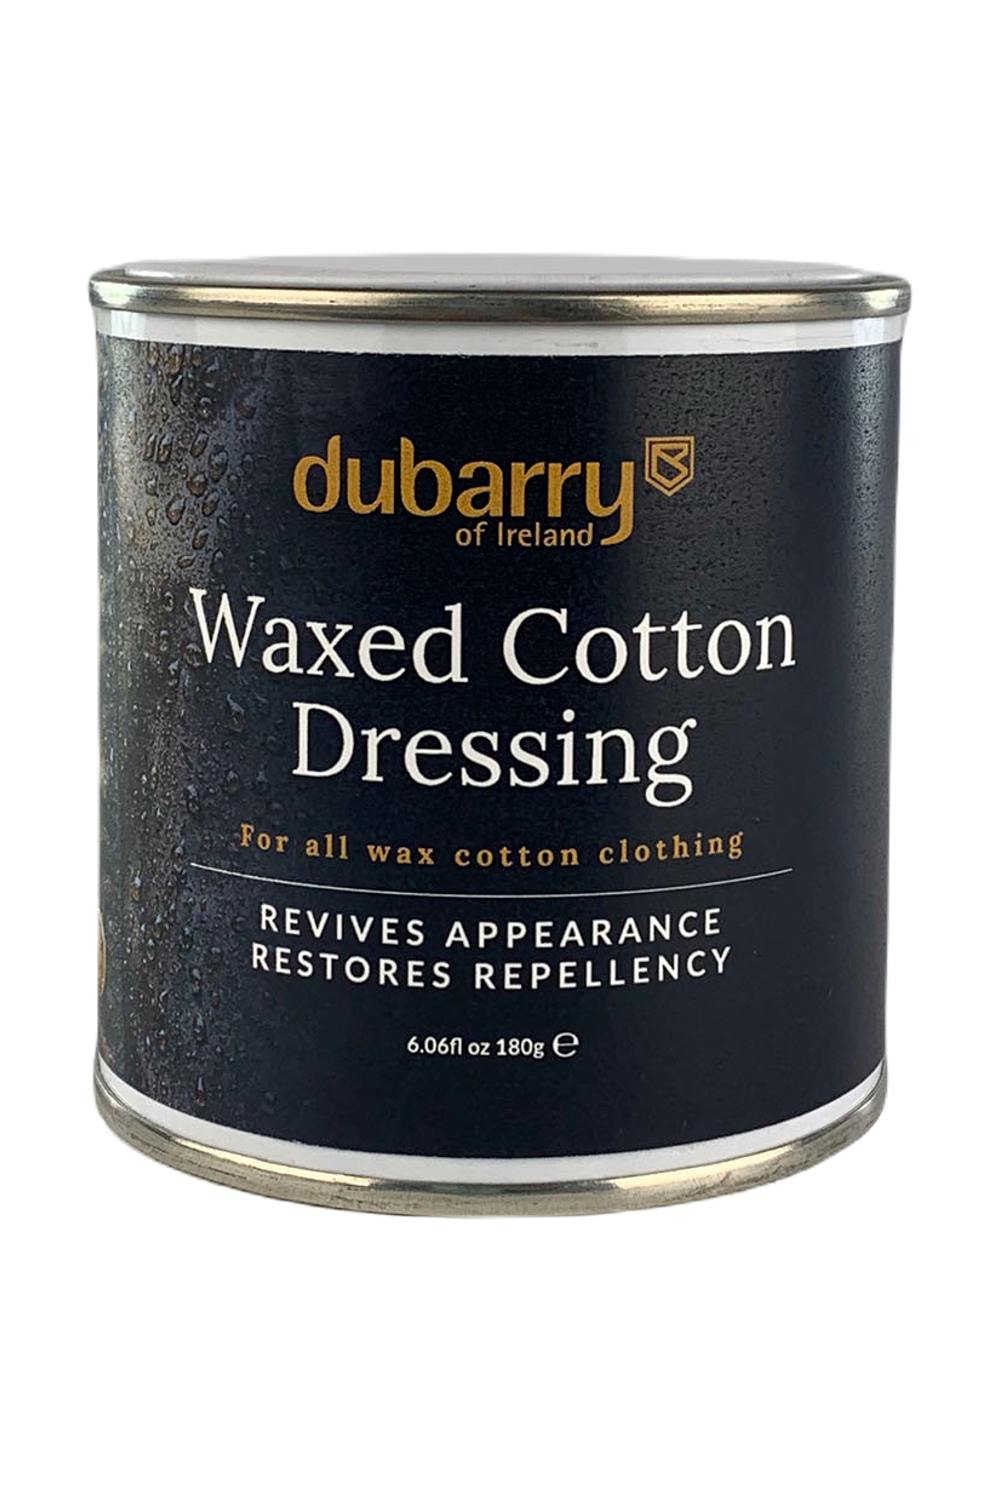 Dubarry Waxed Cotton Dressing